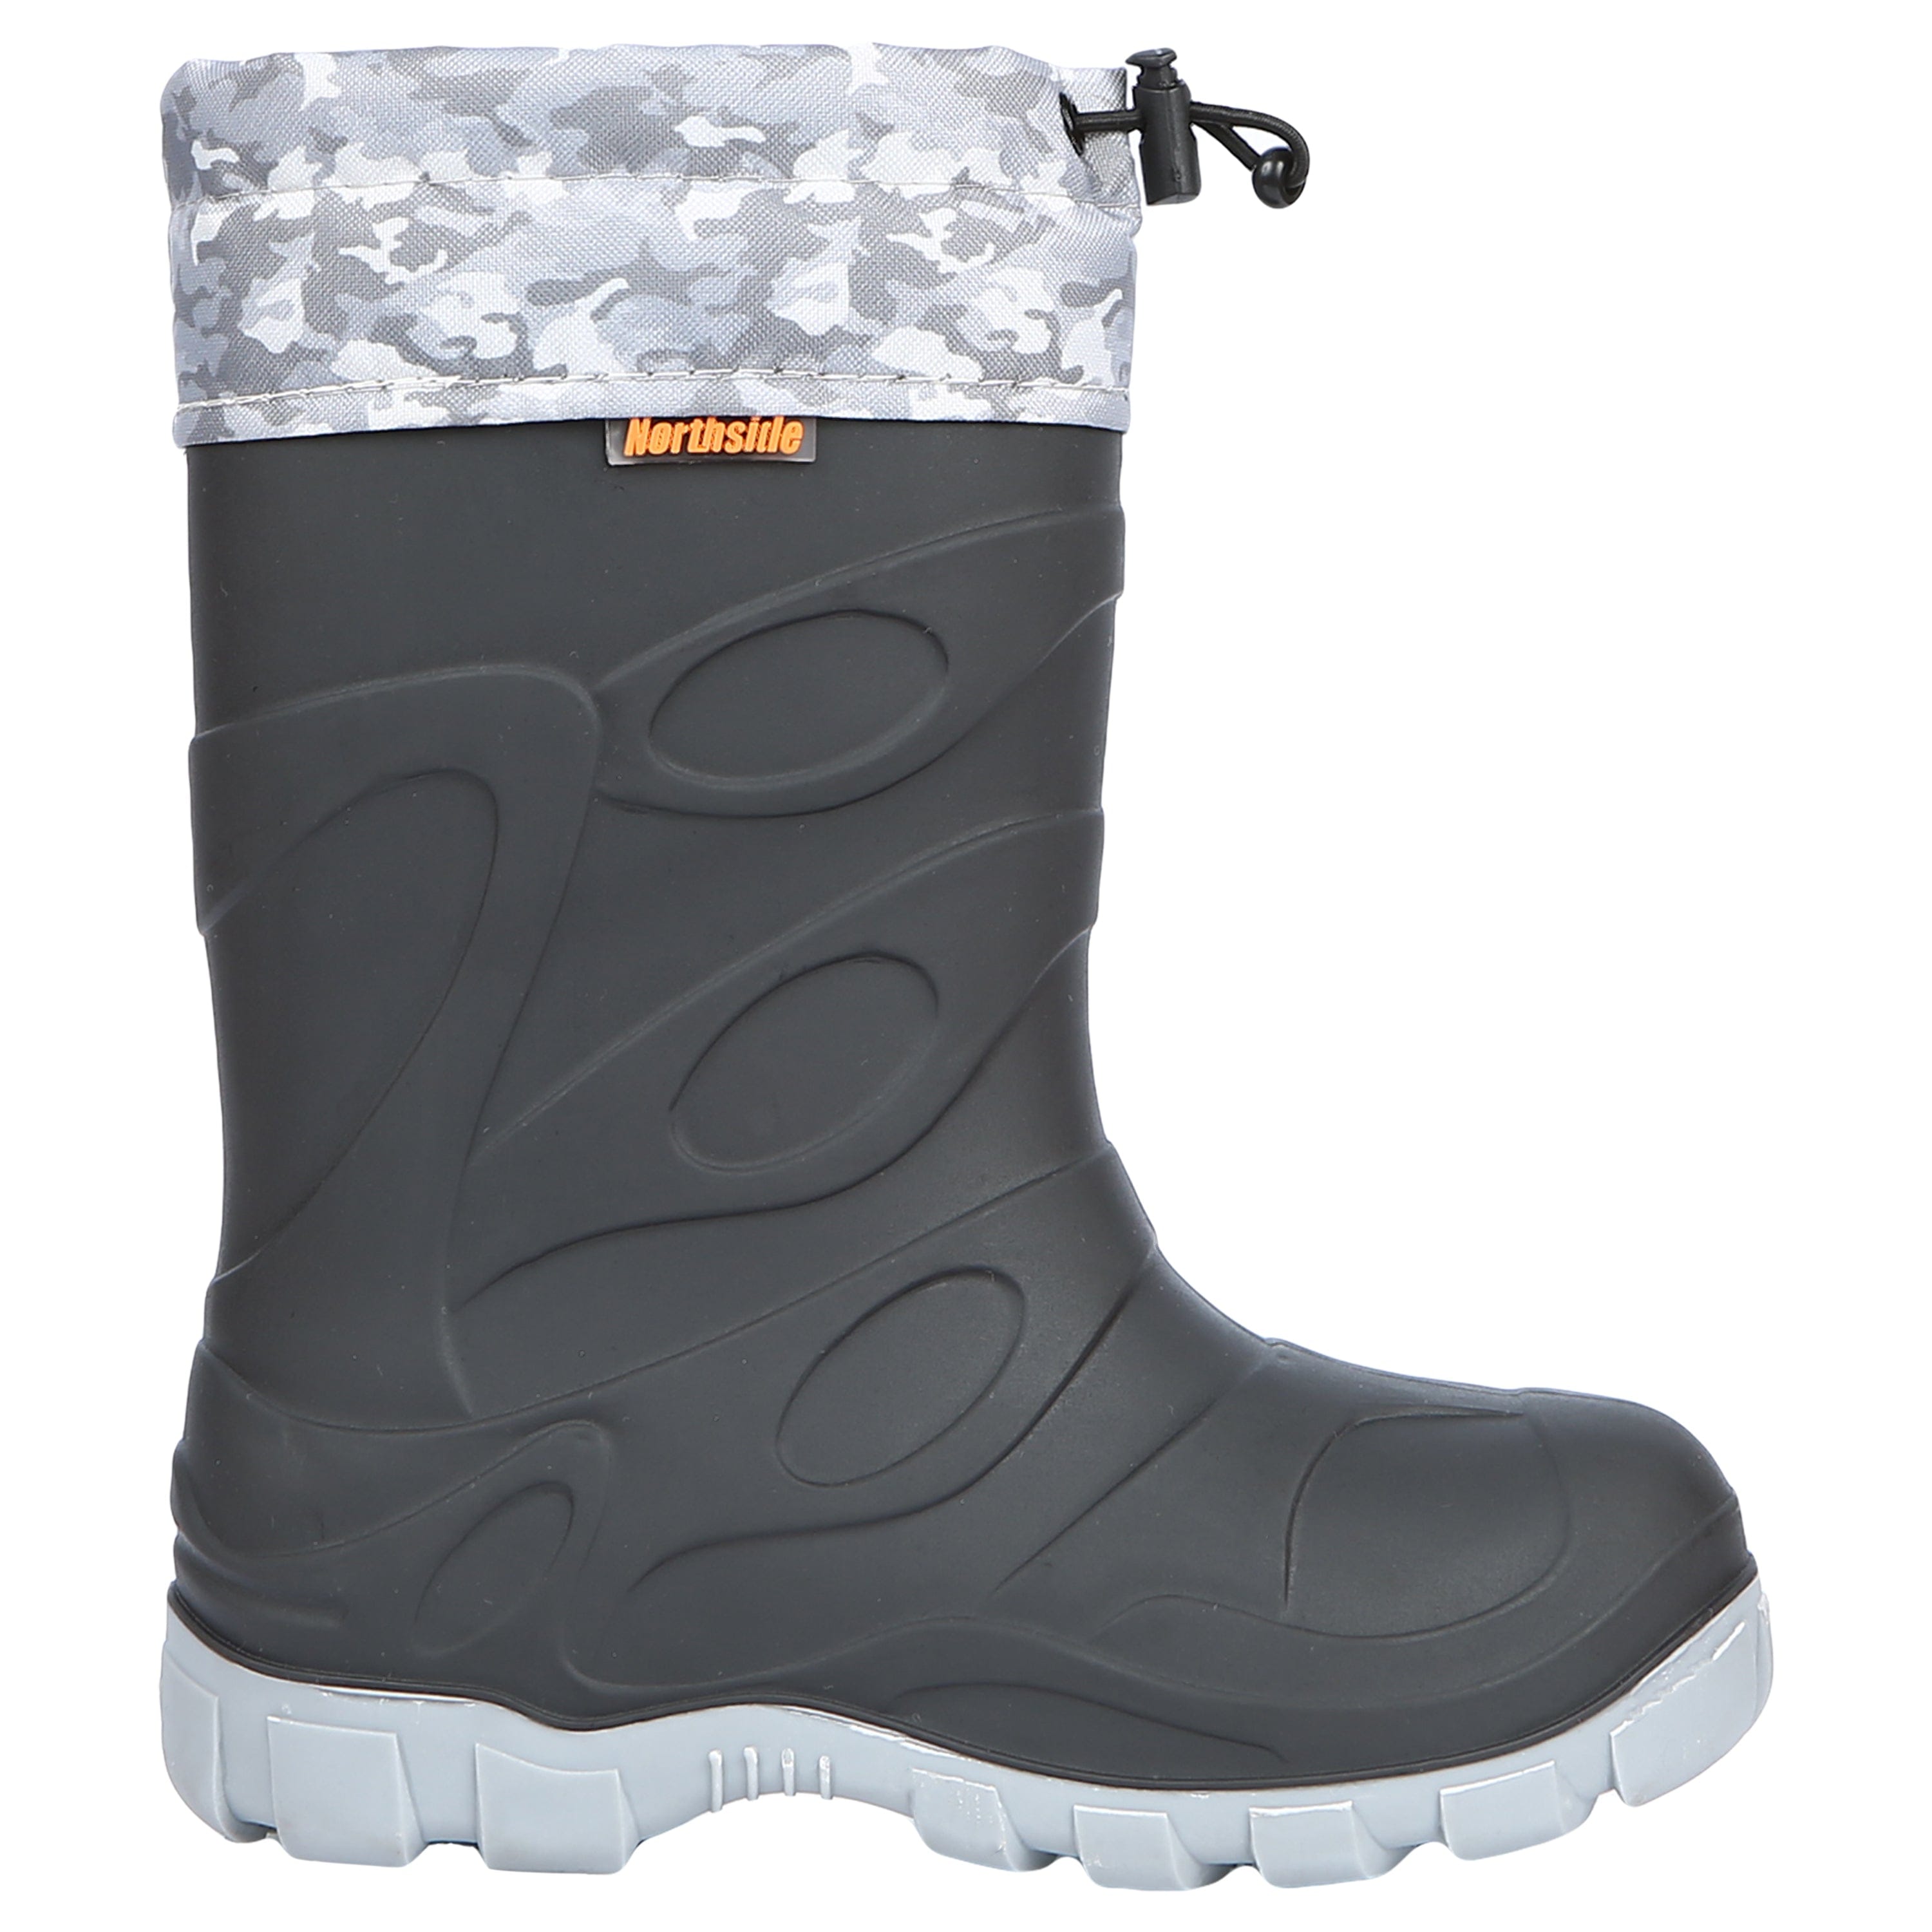 Kid's Orion Waterproof Insulated Rubber All-Weather Boot - Northside USA